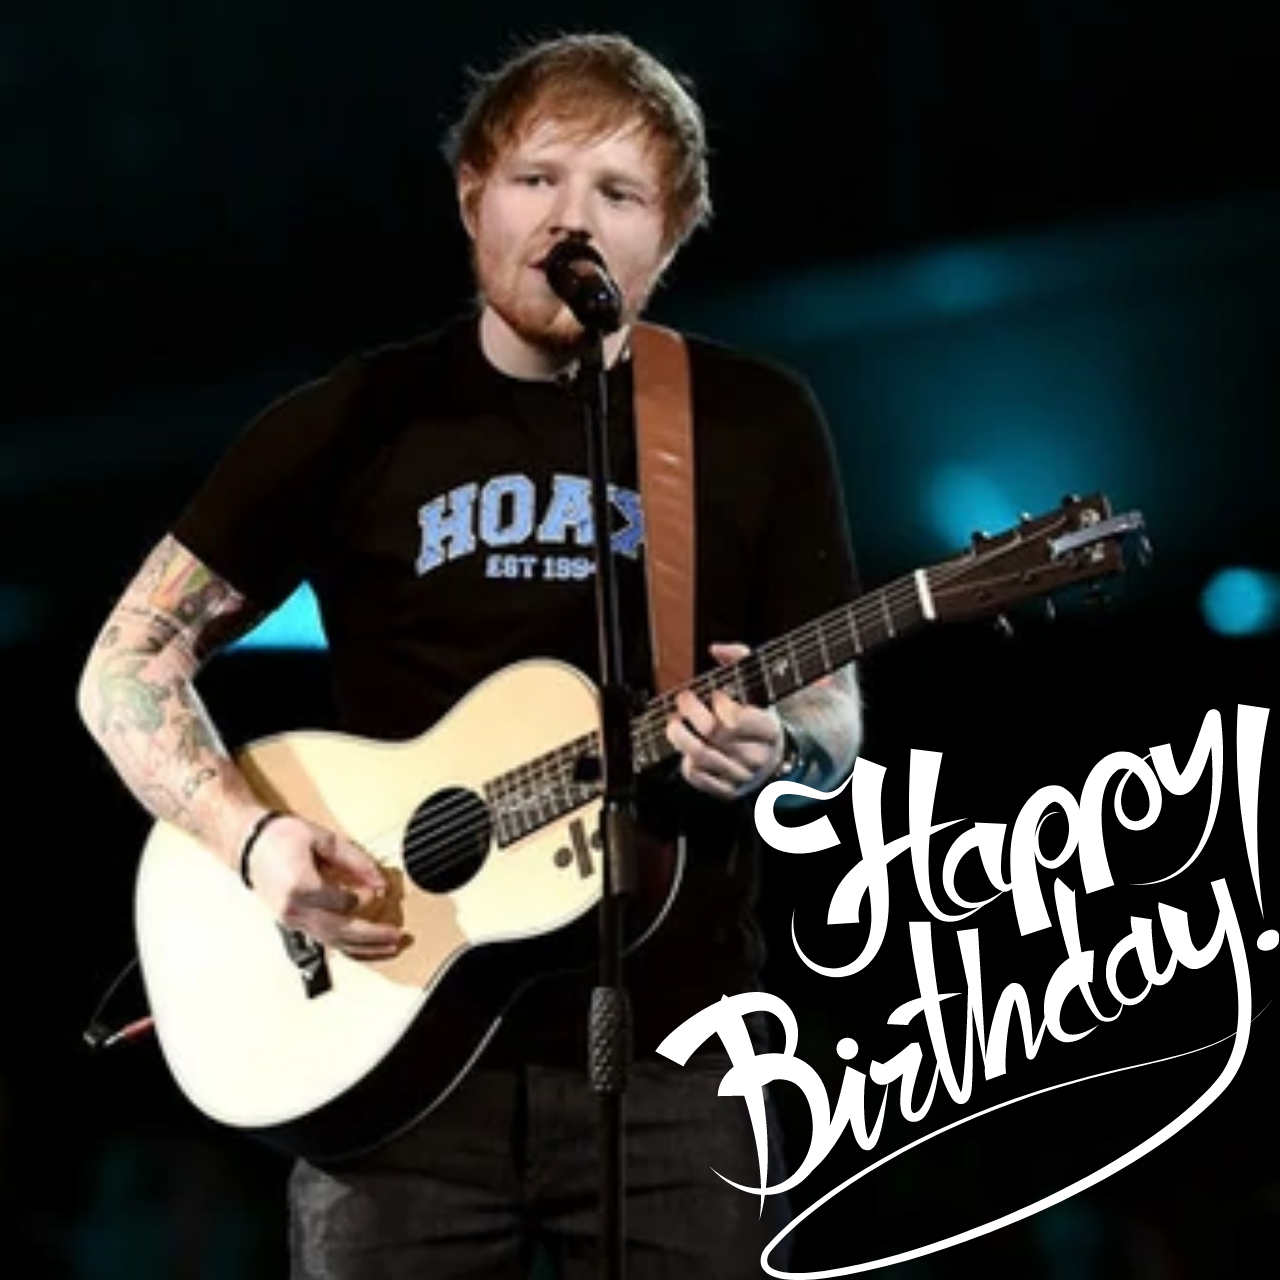 Happy Birthday Ed Sheeran: Wishes, HD Images, Memes, Banners, Quotes, and WhatsApp Status Video to greet "Teddy"